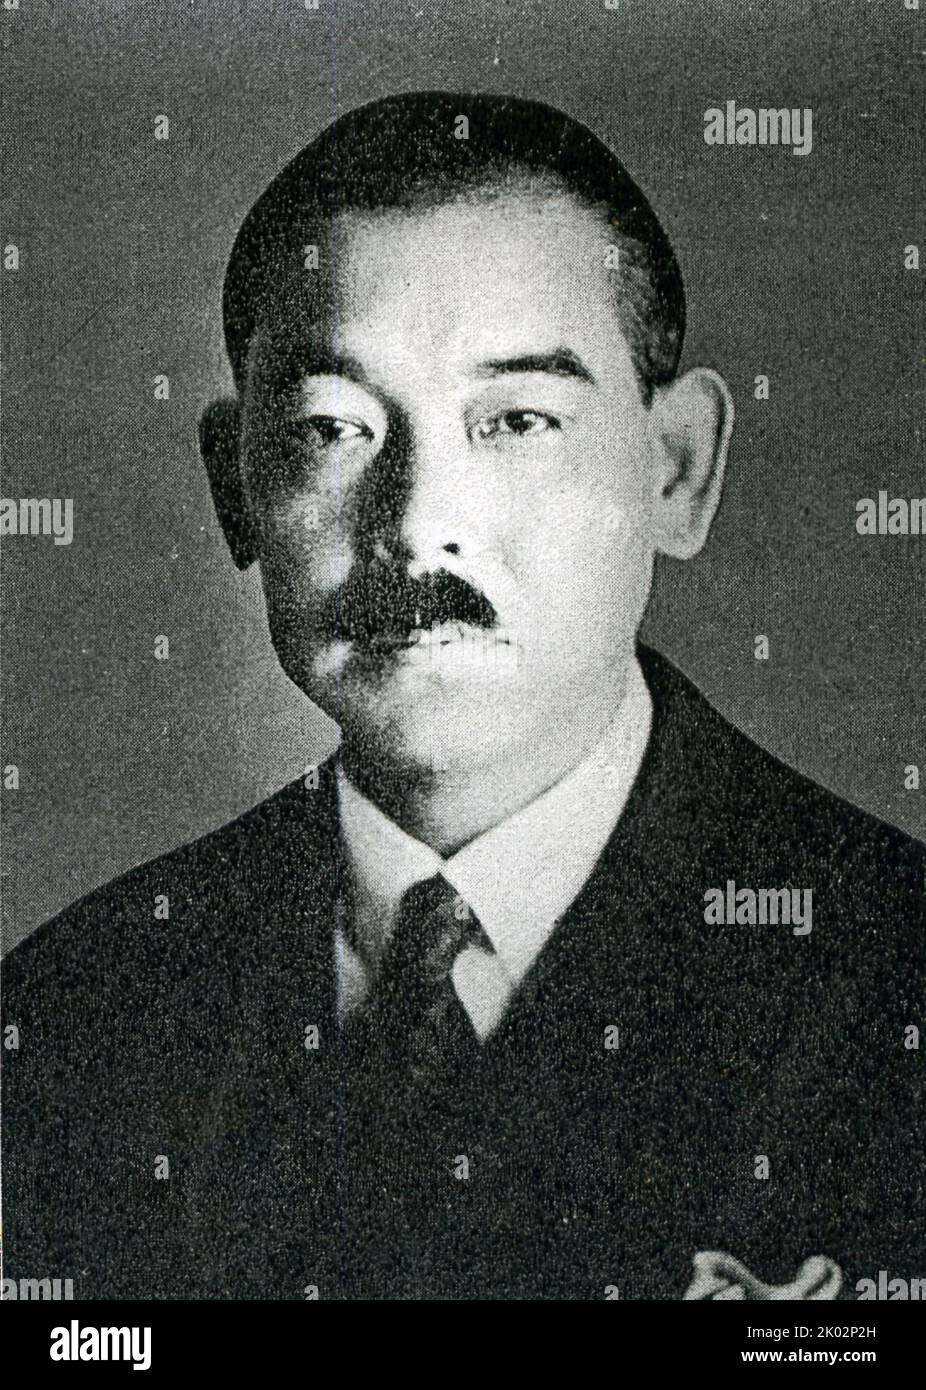 Yosuke Matsuoka (1880 - 1946) Japanese diplomat and Minister of Foreign Affairs of the Empire of Japan during the early stages of World War II. He is best known for his defiant speech at the League of Nations in 1933, ending Japan's participation in the organization. He was also one of the architects of the Tripartite Pact and the Soviet-Japanese Neutrality Pact in the years immediately prior to the outbreak of war. Stock Photo